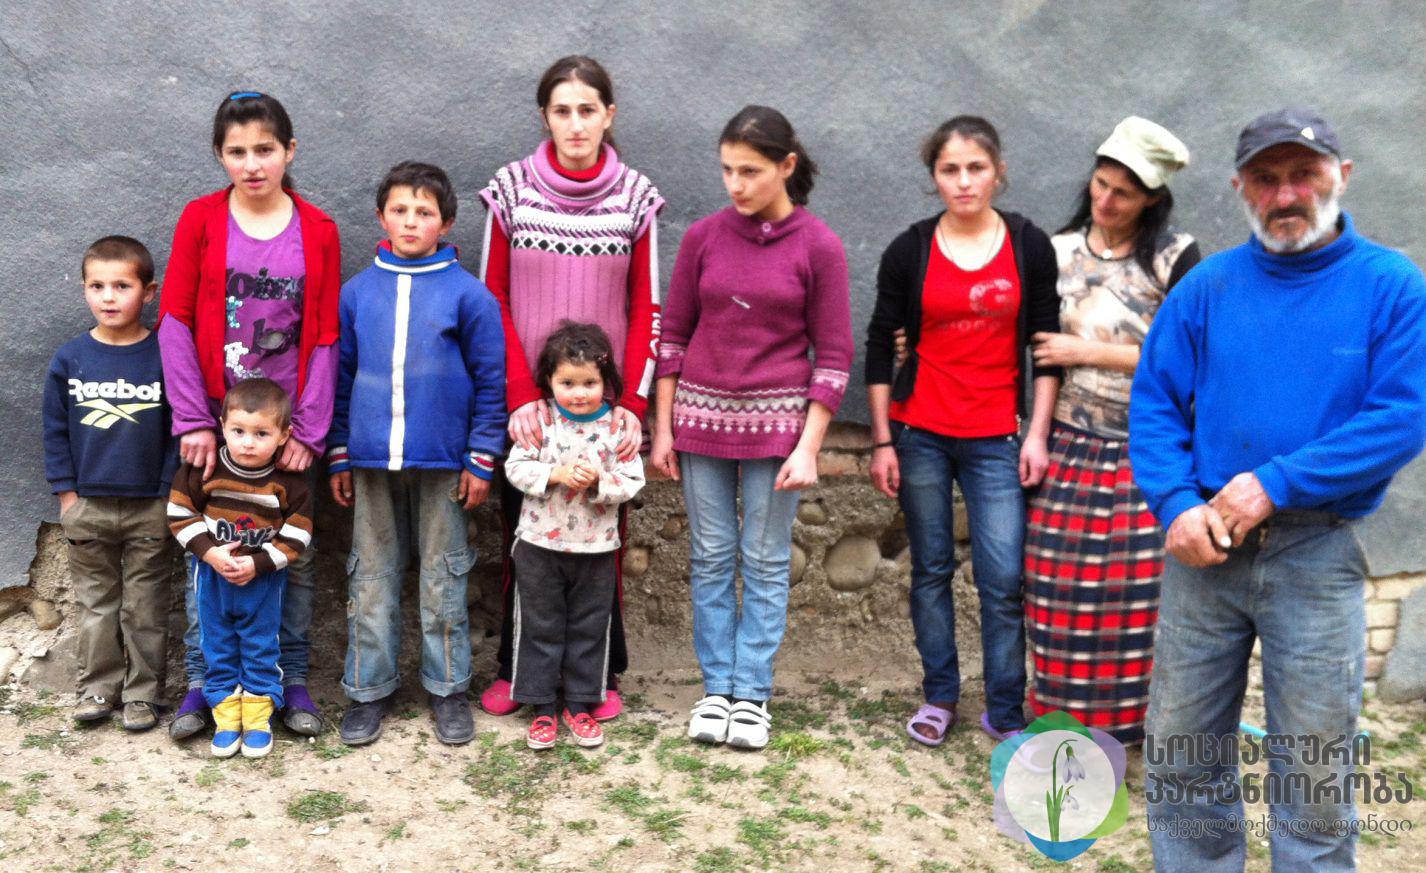 The beneficiary families with many children prepare for the winter image